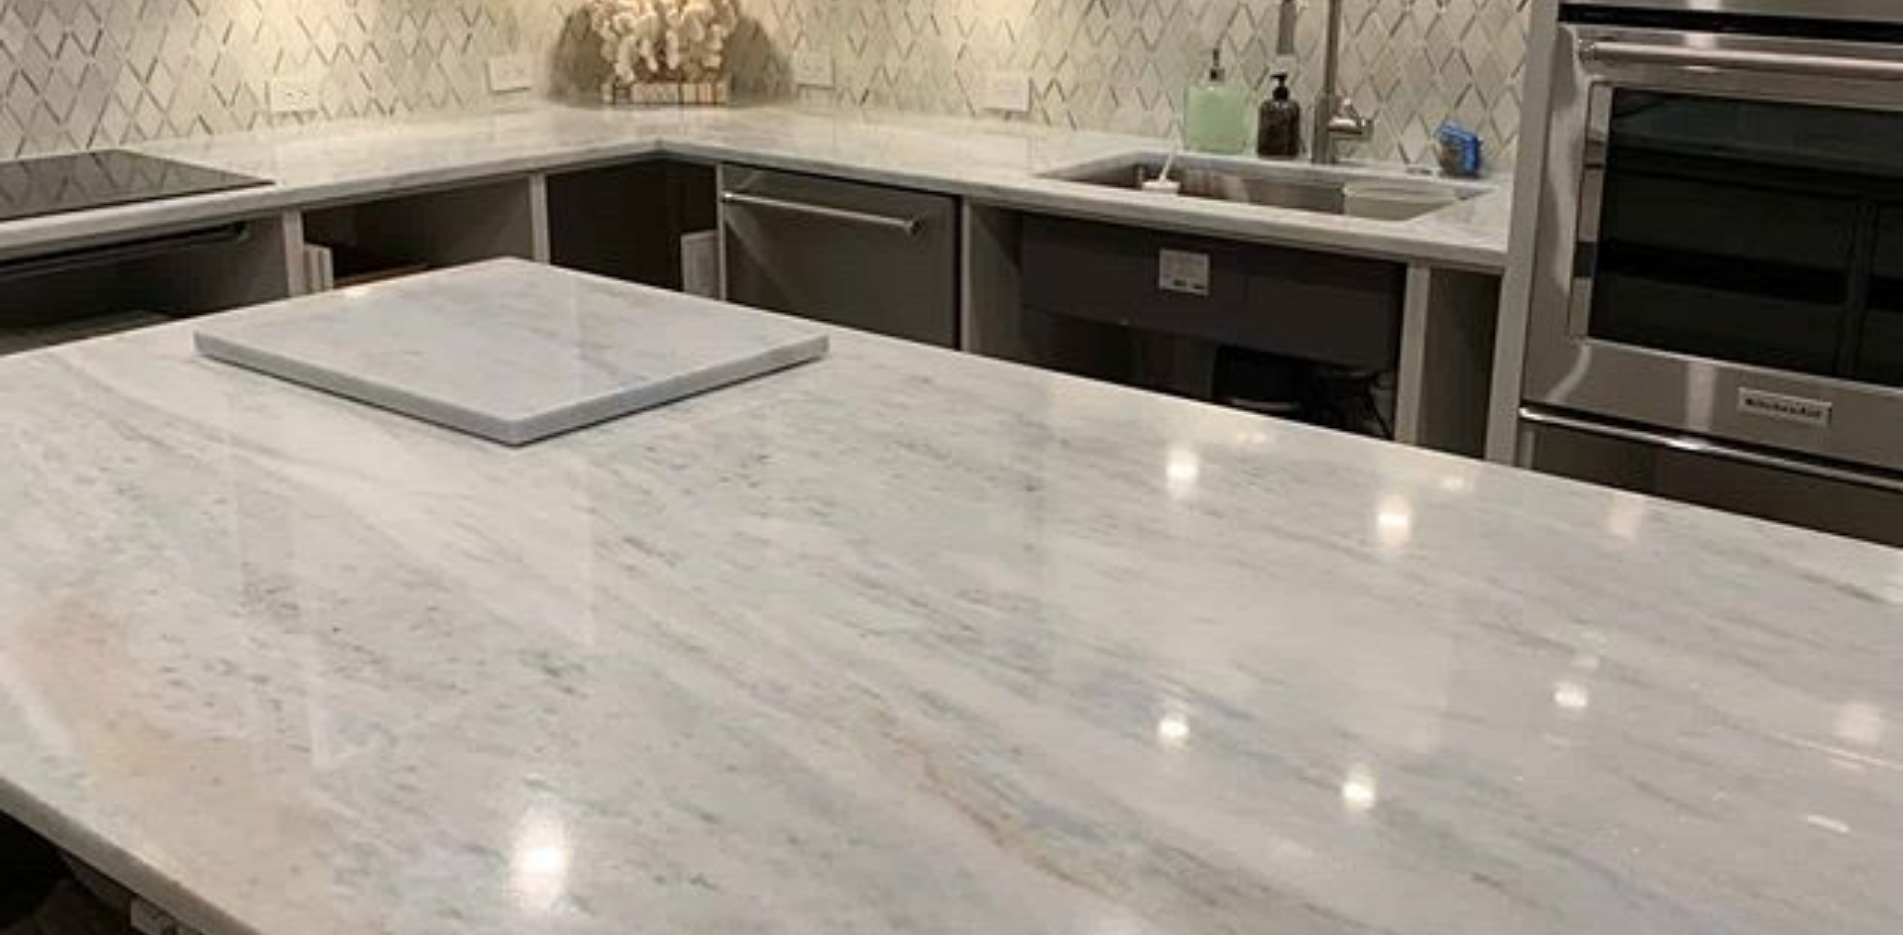  - How To Prevent Stains And Etching On Marble Countertops?